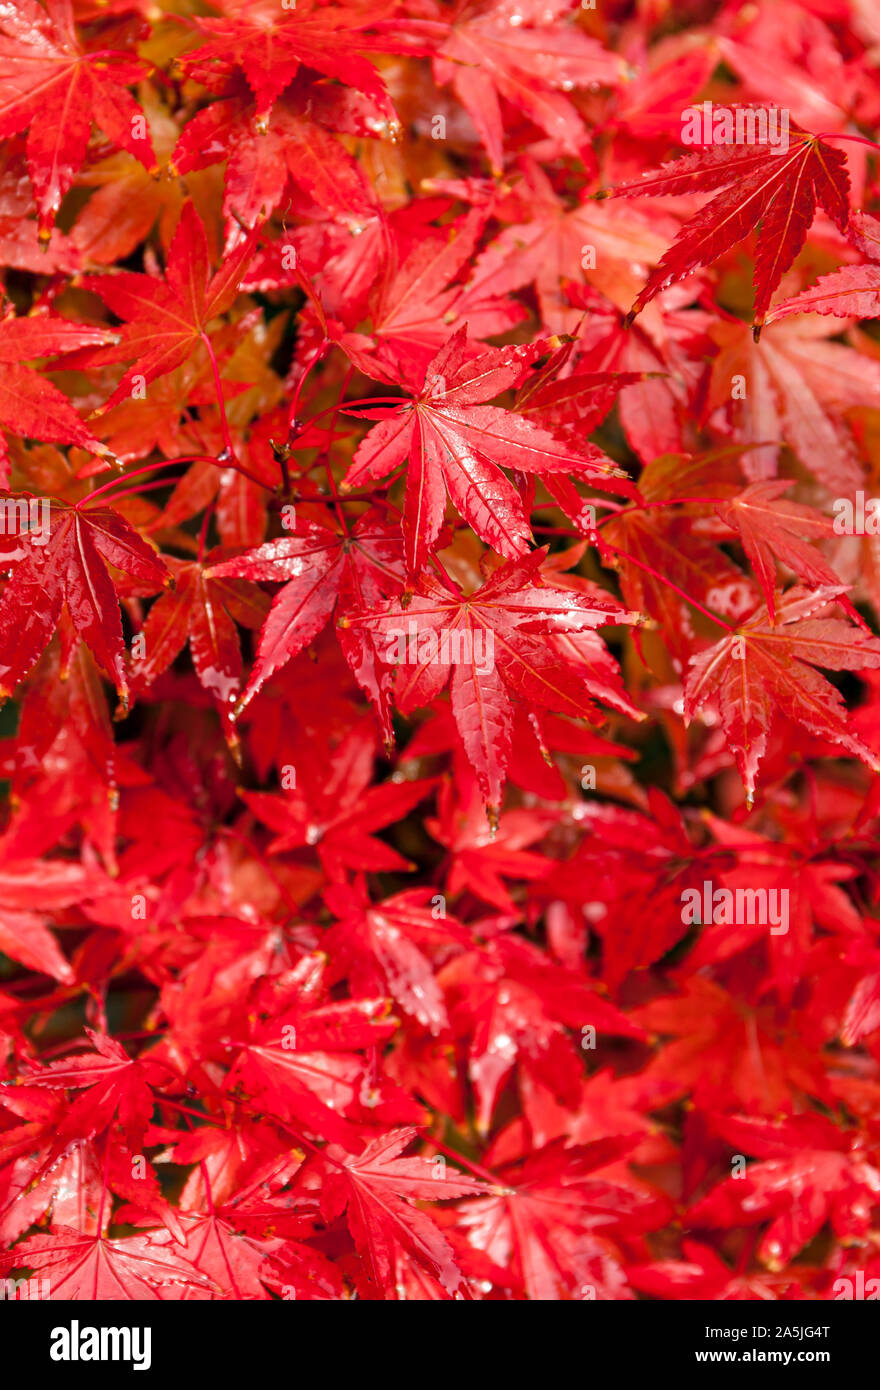 Japanese Maple tree leaves in autumn. Stock Photo